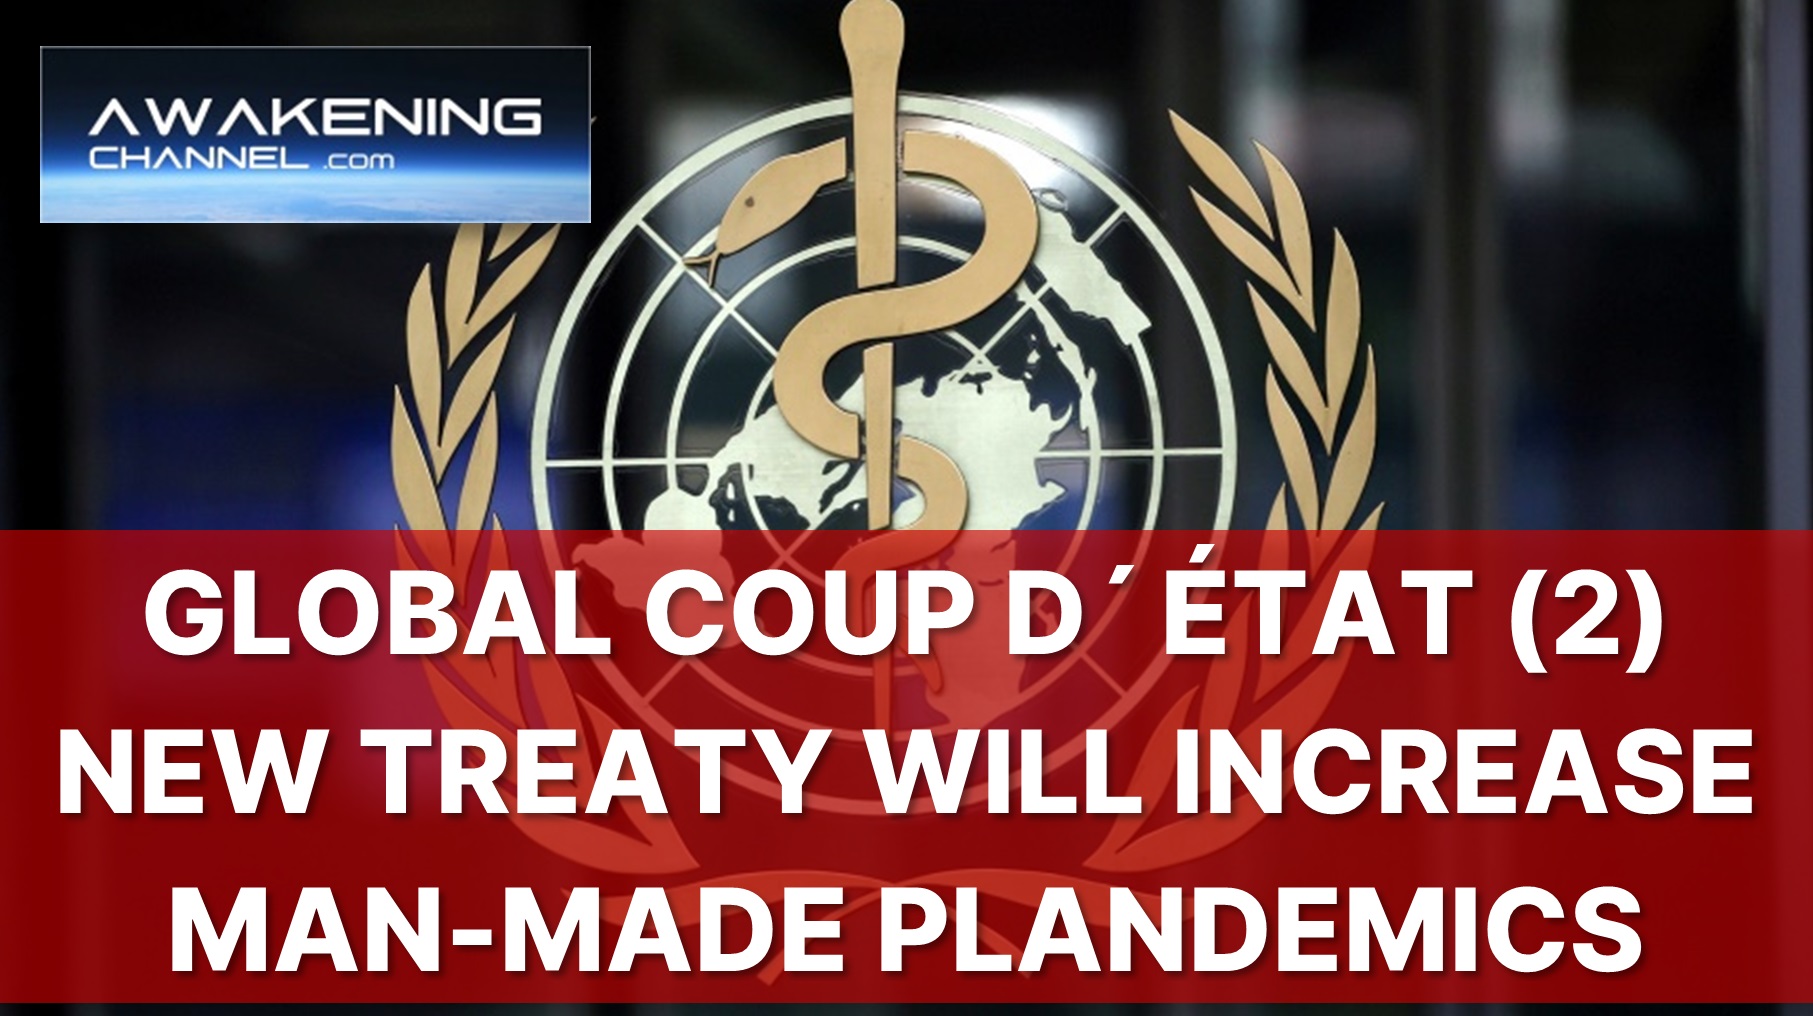 Unmasking The Global Coup D’État (Part 2): The WHO’s Proposed Treaty Will Increase Man-Made Plandemics